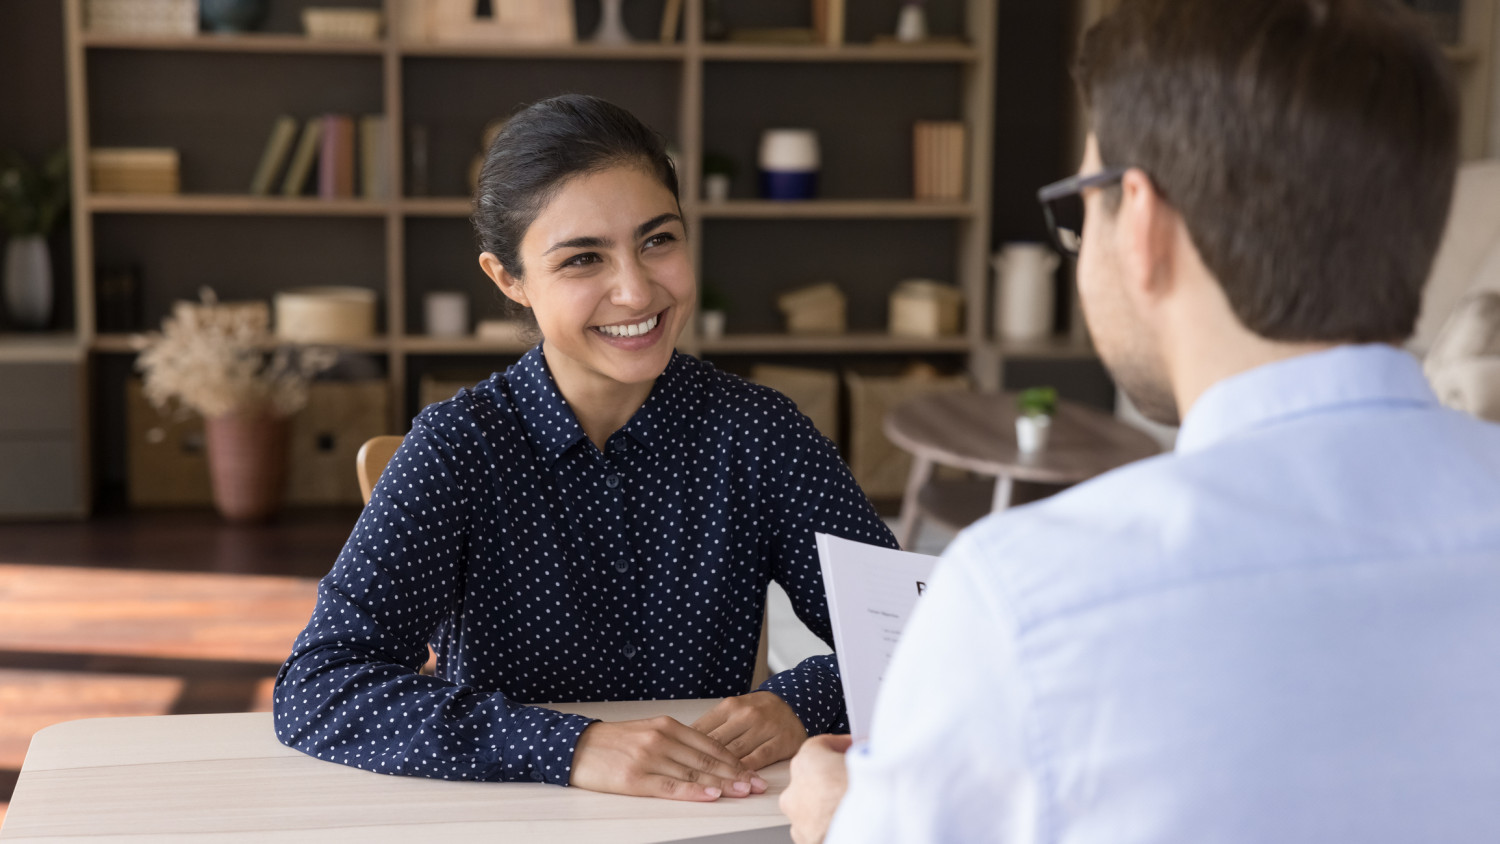 A positive job interview in progress with a potential support worker candidate in Australia, signifying the importance of interpersonal skills in the role.